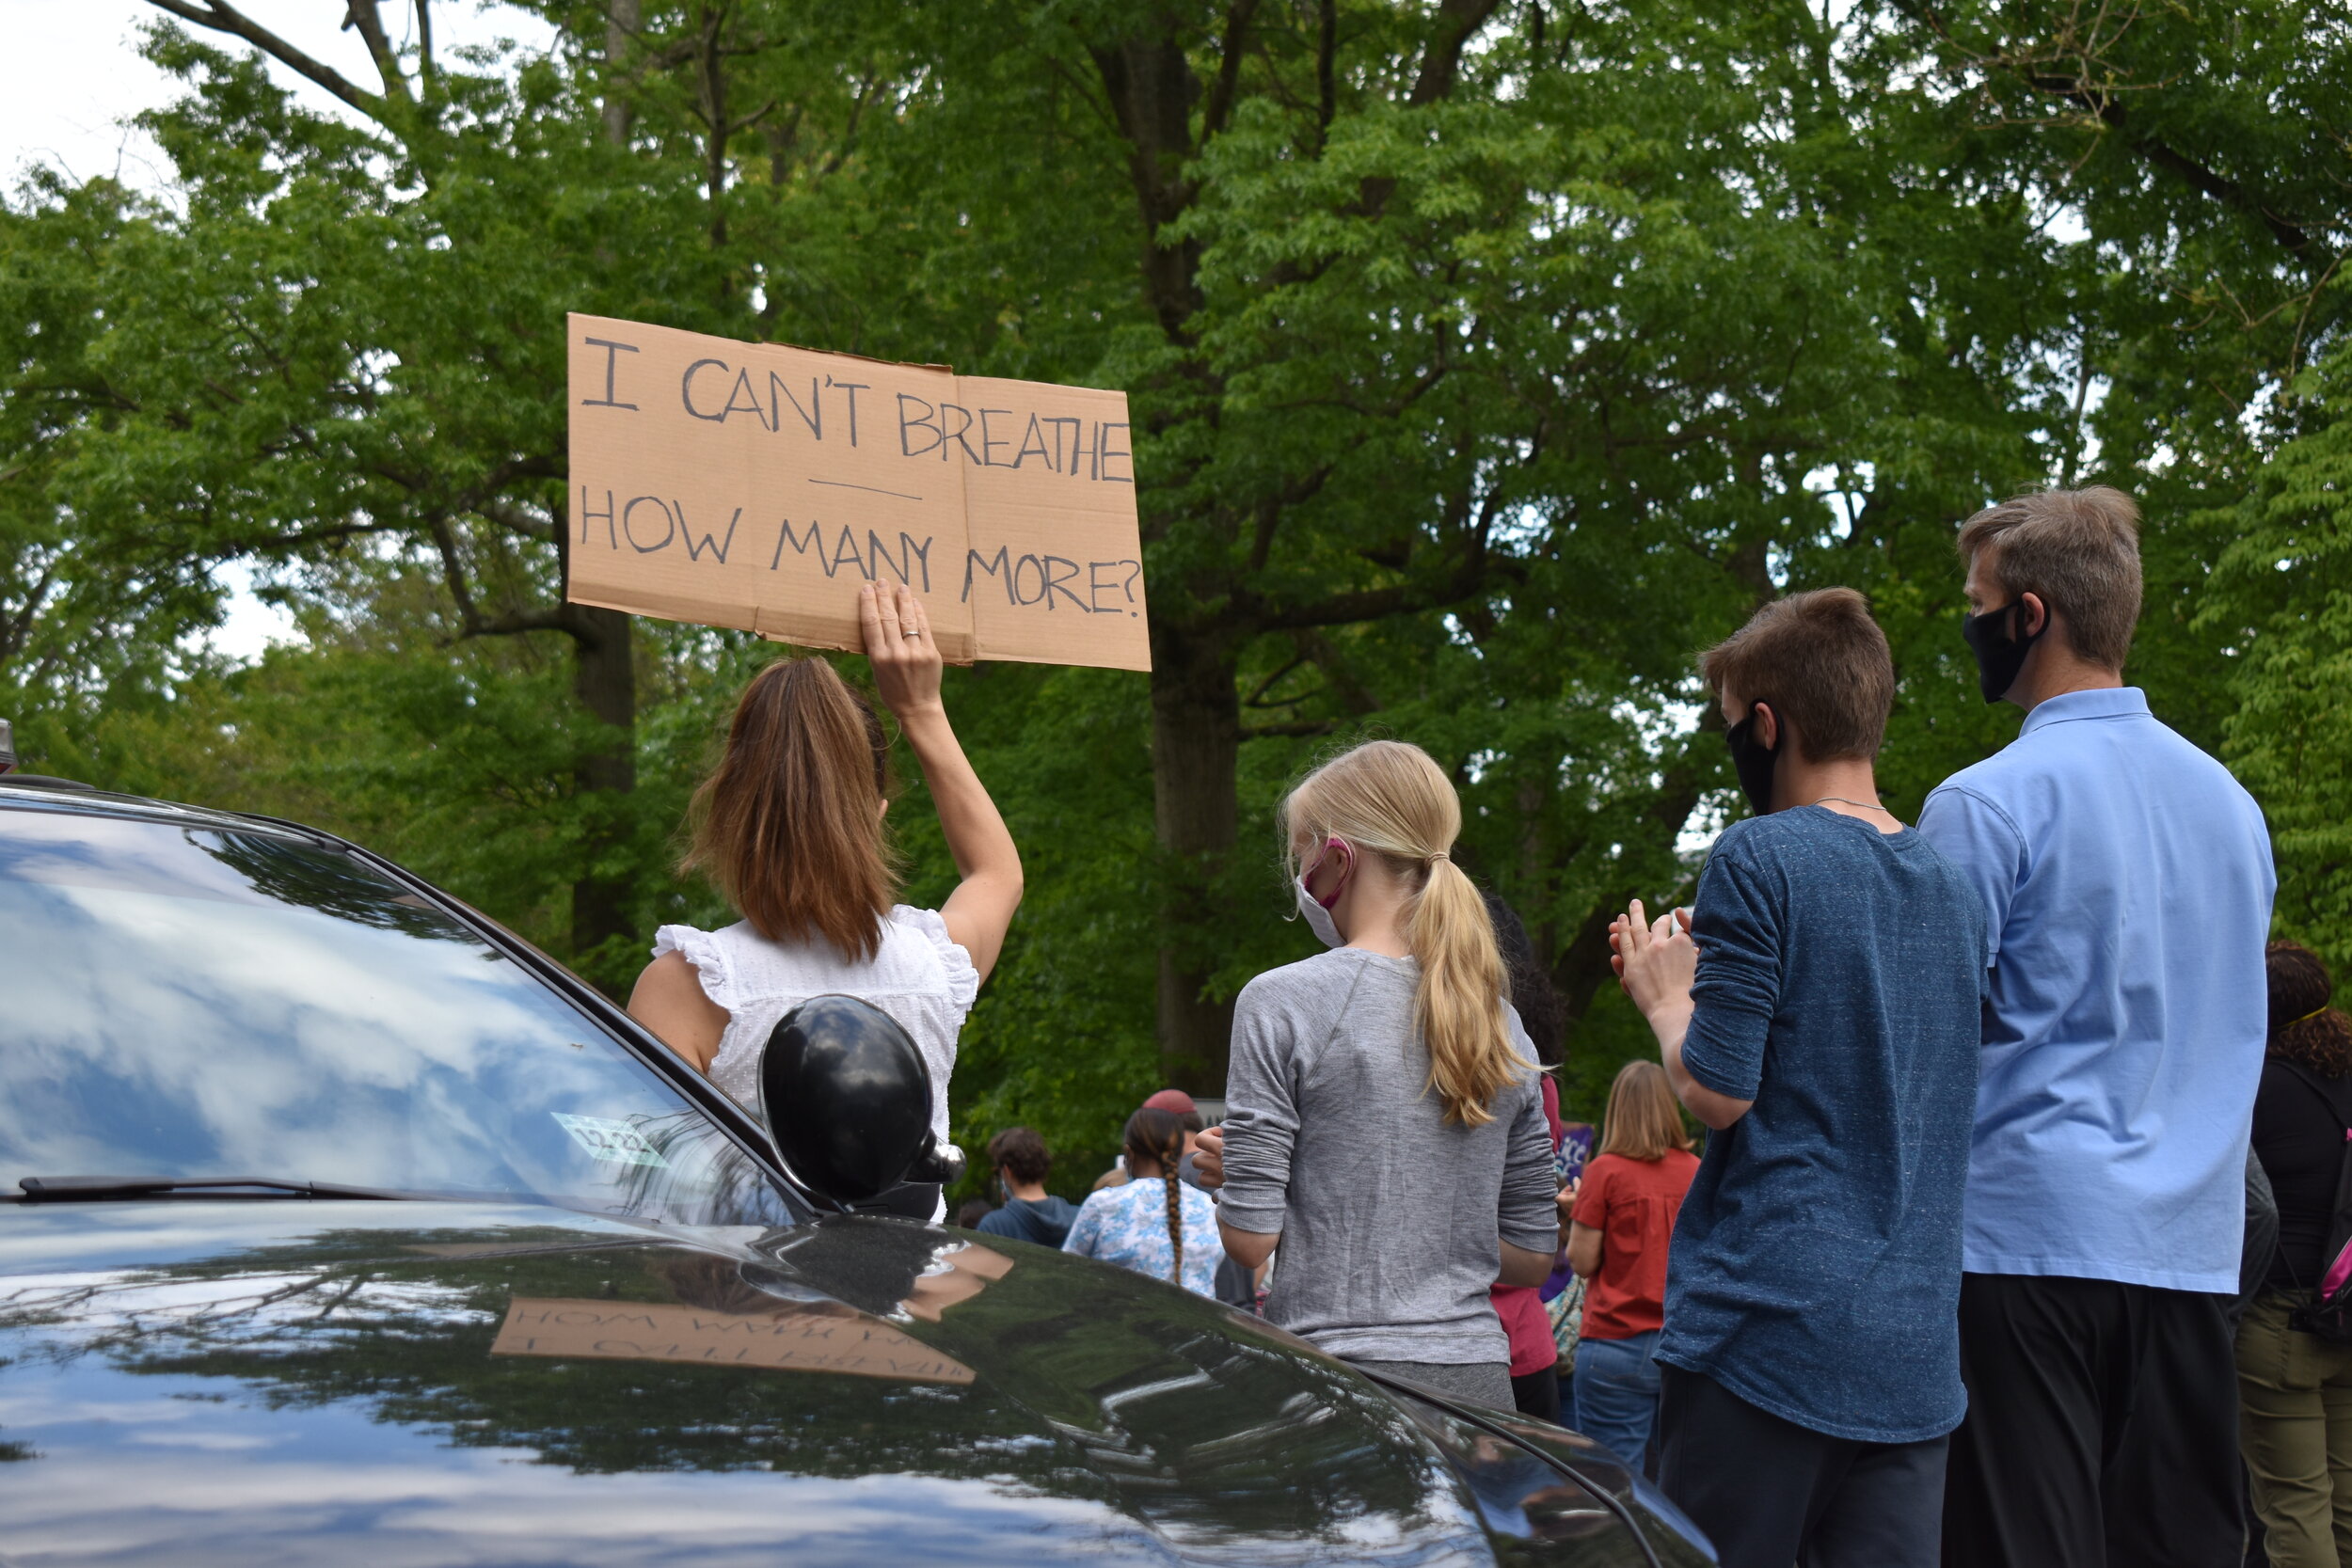  Protestors at a rally in Princeton, New Jersey on Tuesday, June 2, 2020.  Photo by: Madison Mento  